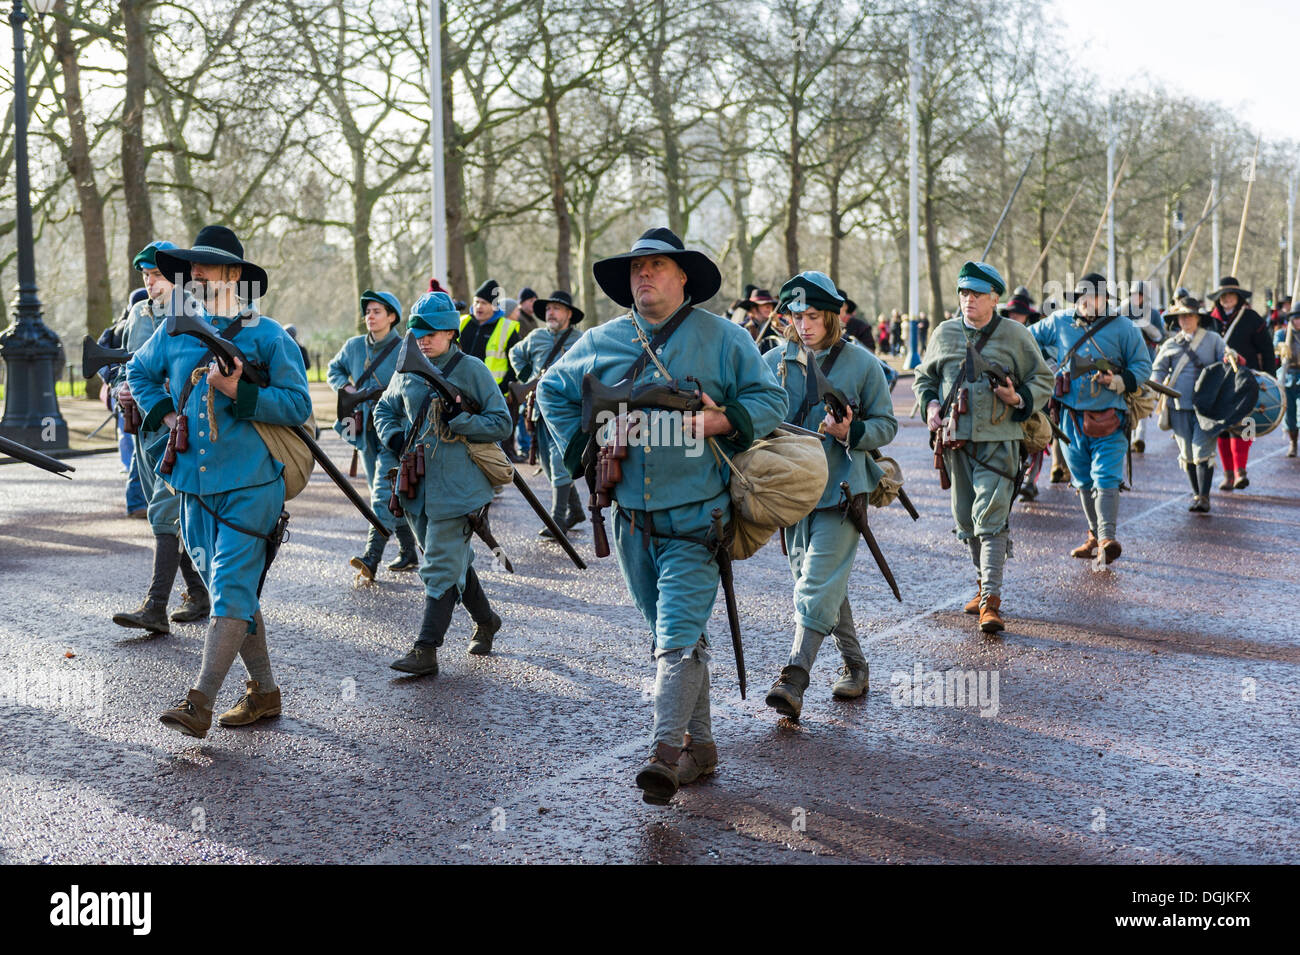 English Civil War Society enthusiasts march down The Mall to attend a service to commemorate the execution of King Charles I. Stock Photo